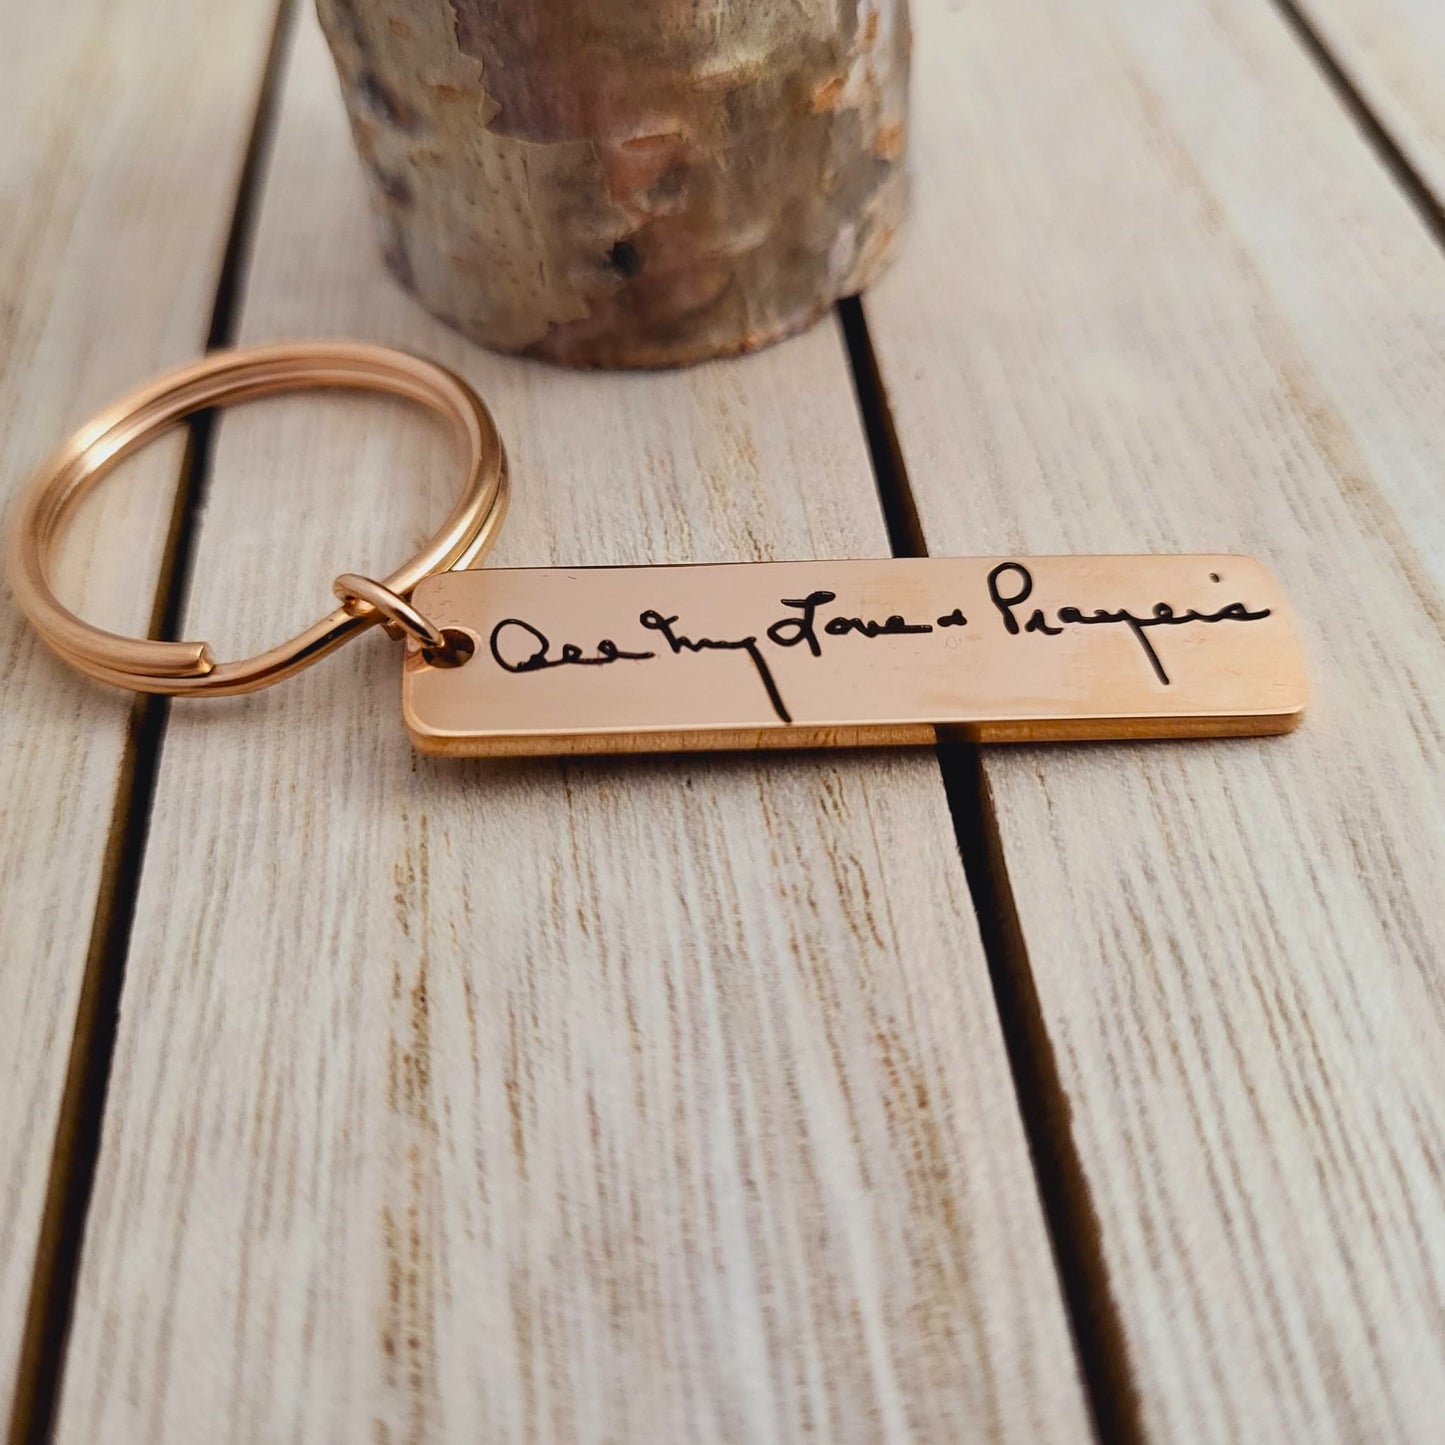 Actual Handwriting Keychain. Engrave a Signature or Handwriting.